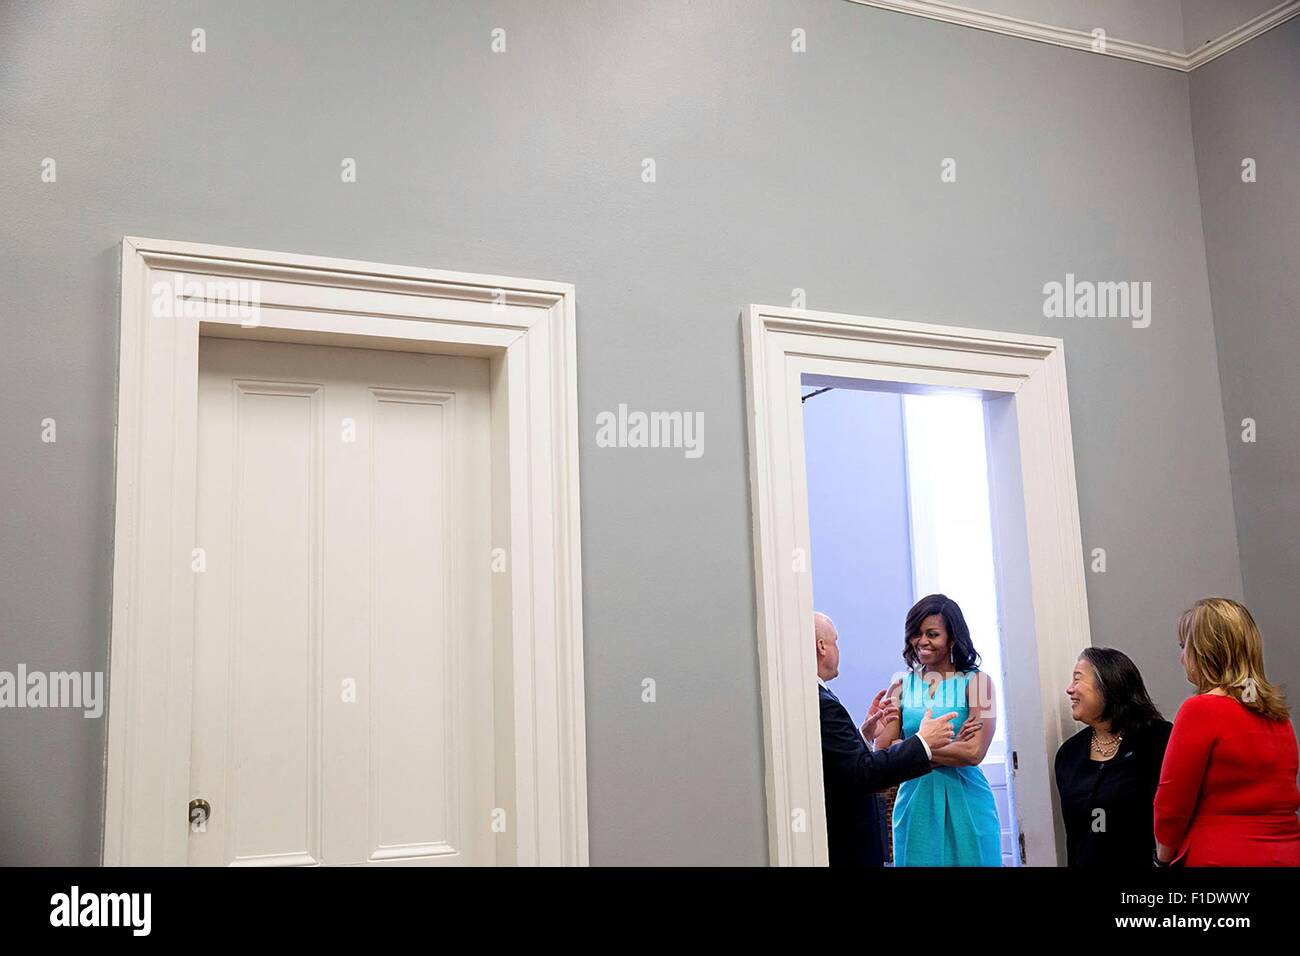 U.S. First Lady Michelle Obama talks with New Orleans Mayor Mitch Landrieu, her Chief of Staff Tina Tchen and Cheryl Landrieu prior to the 'Mayor's Challenge to End Veteran Homelessness' event at Gallier Hall April 20, 2015 in New Orleans, Louisiana. Stock Photo